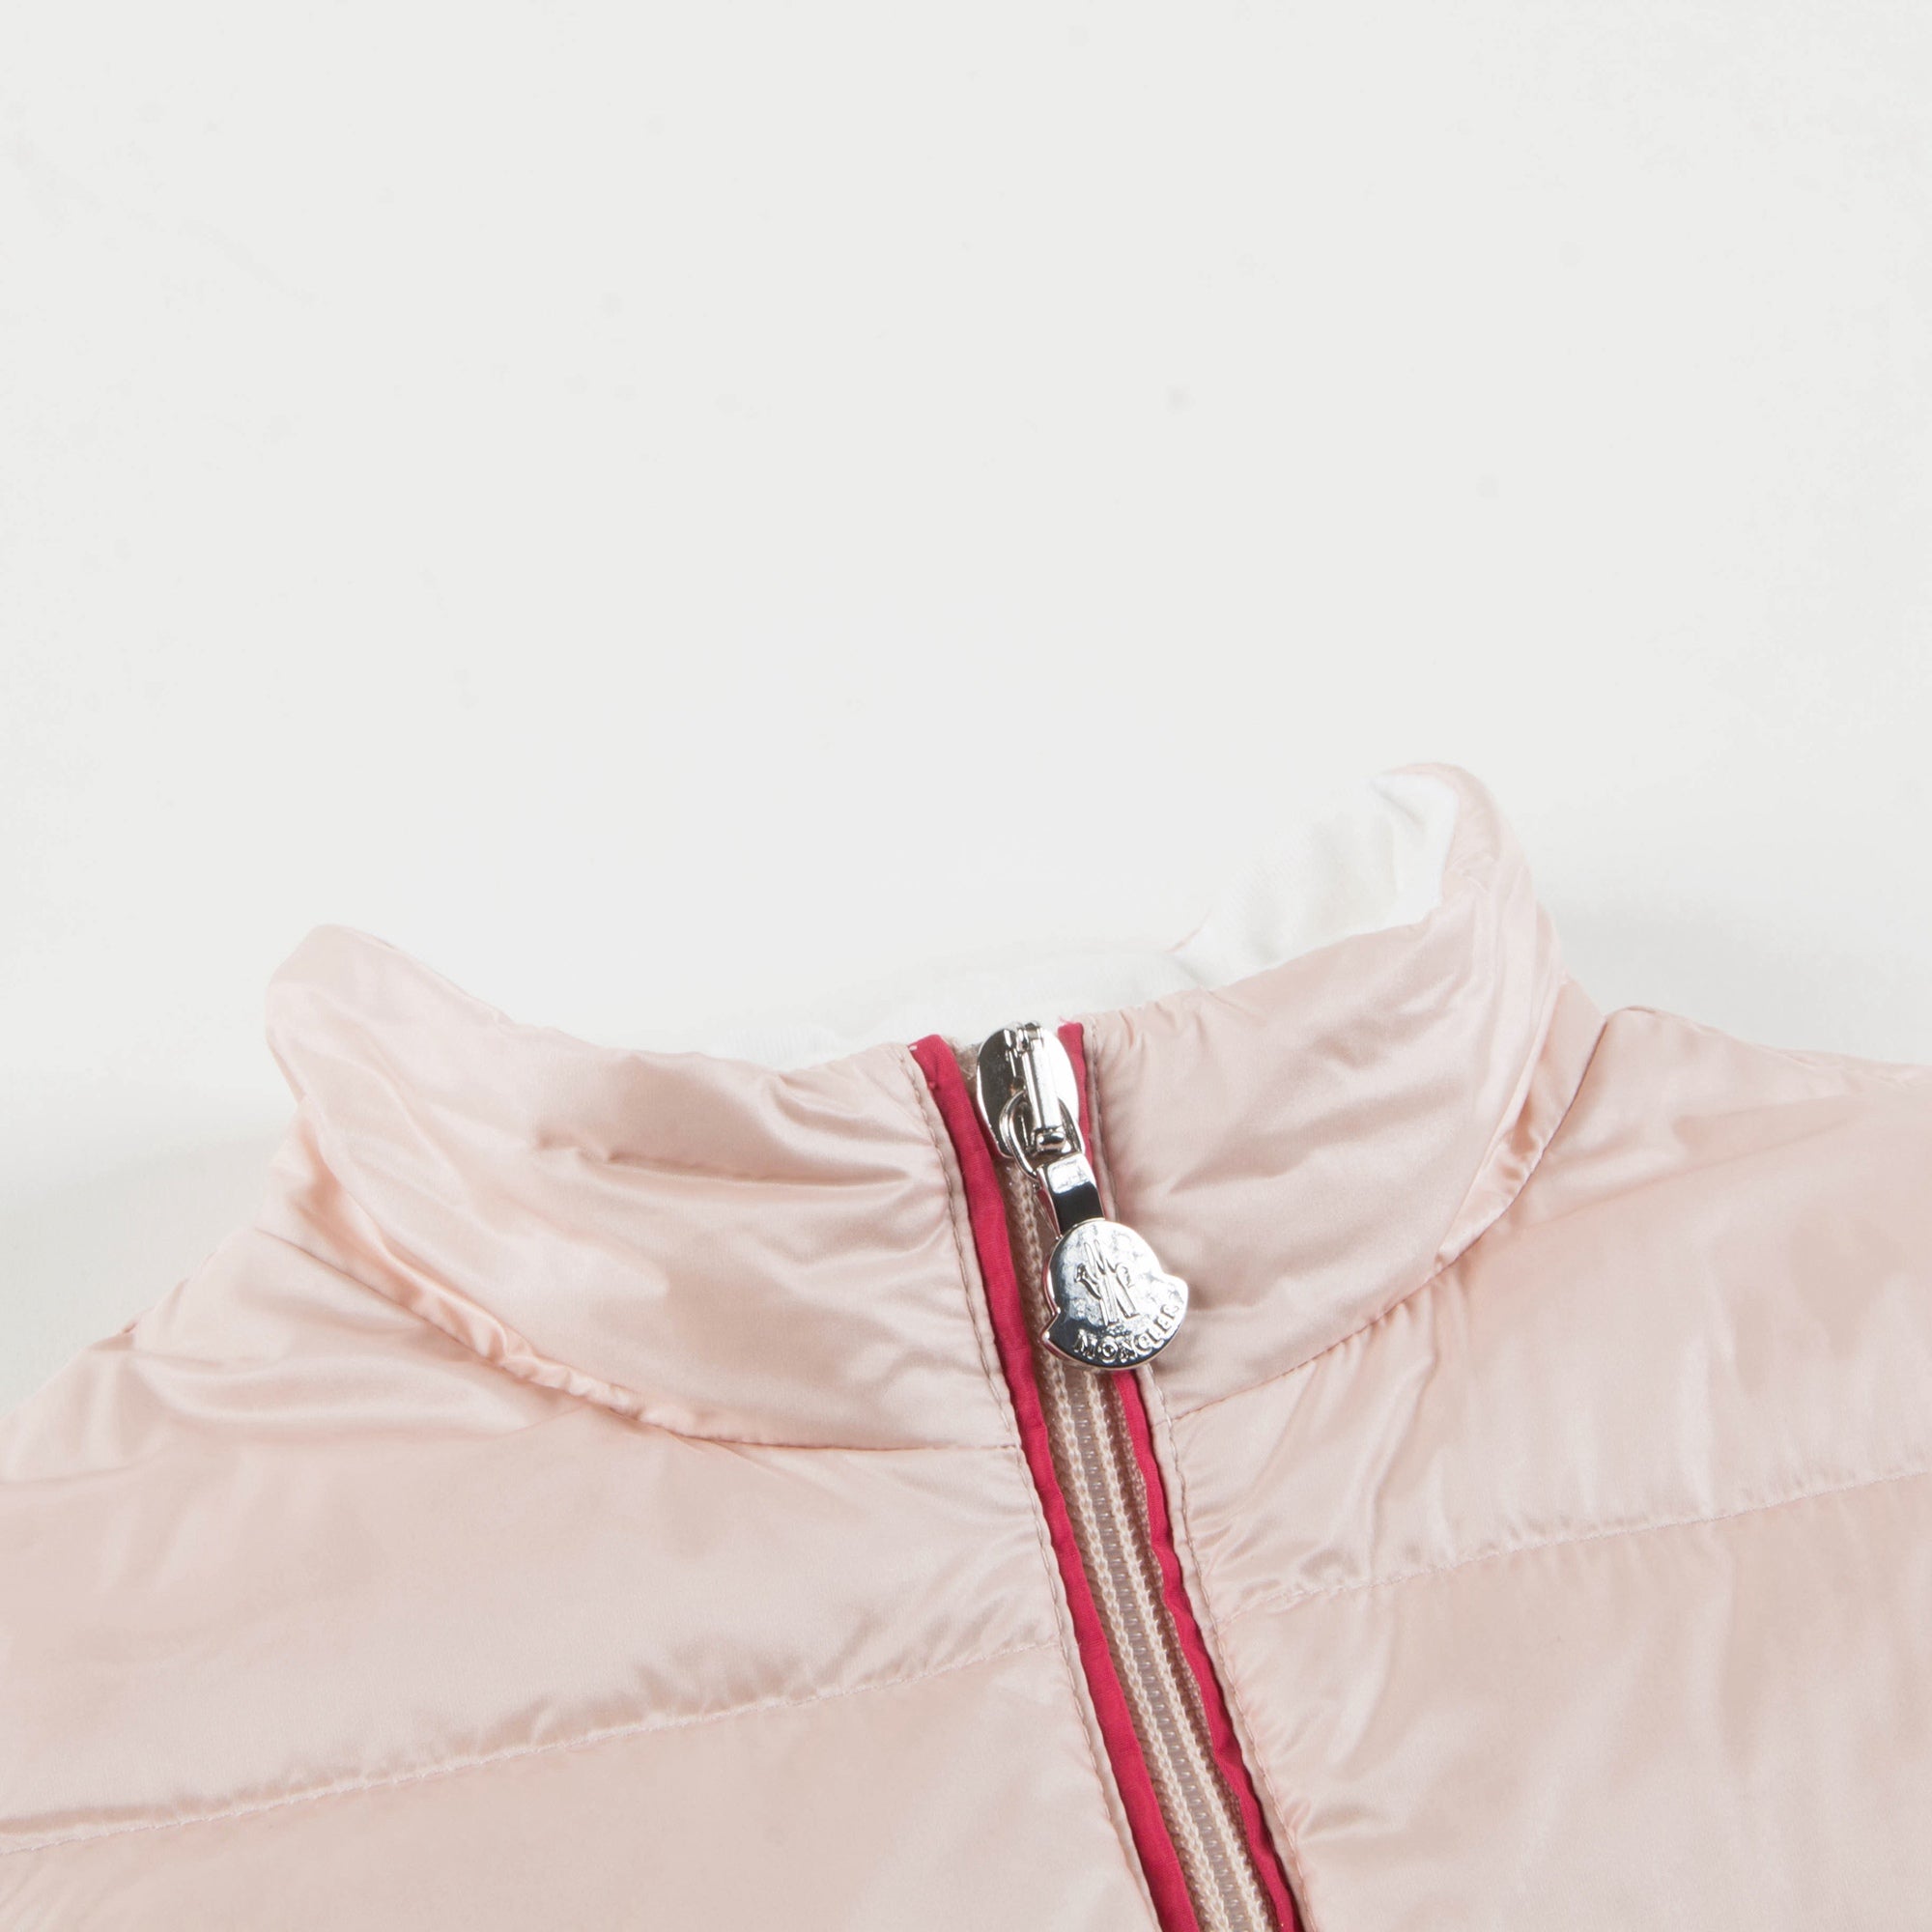 Baby Girls Pale Pink "Guede  Giubbotto" Coat